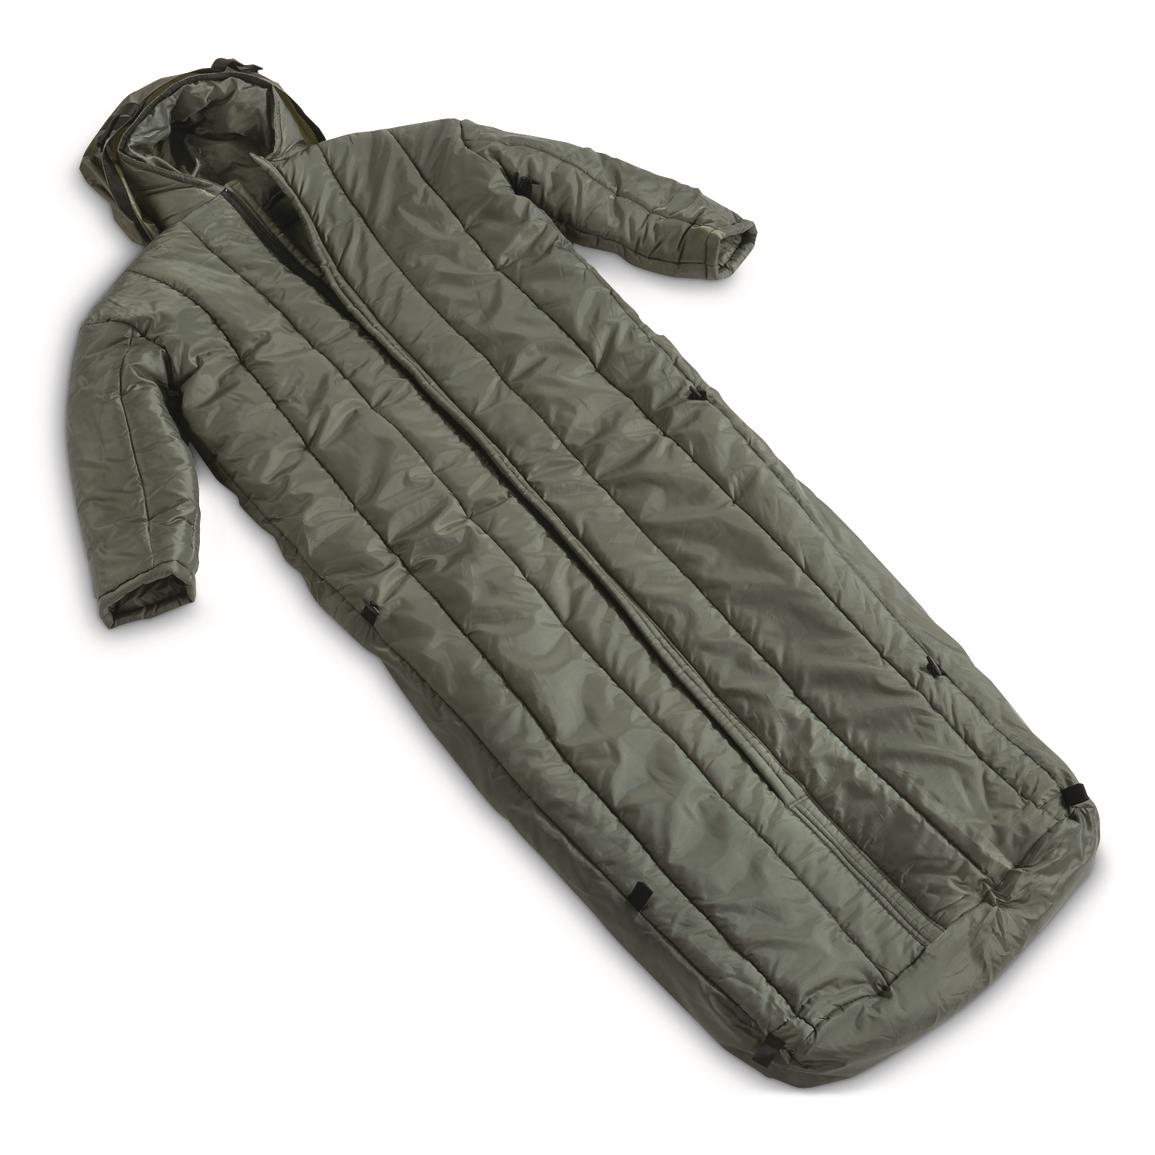 Supersonic speed Mince Controversial Guide Gear Sportsman's Sleeping Bag with Arms - 716473, Rectangle Bags at  Sportsman's Guide